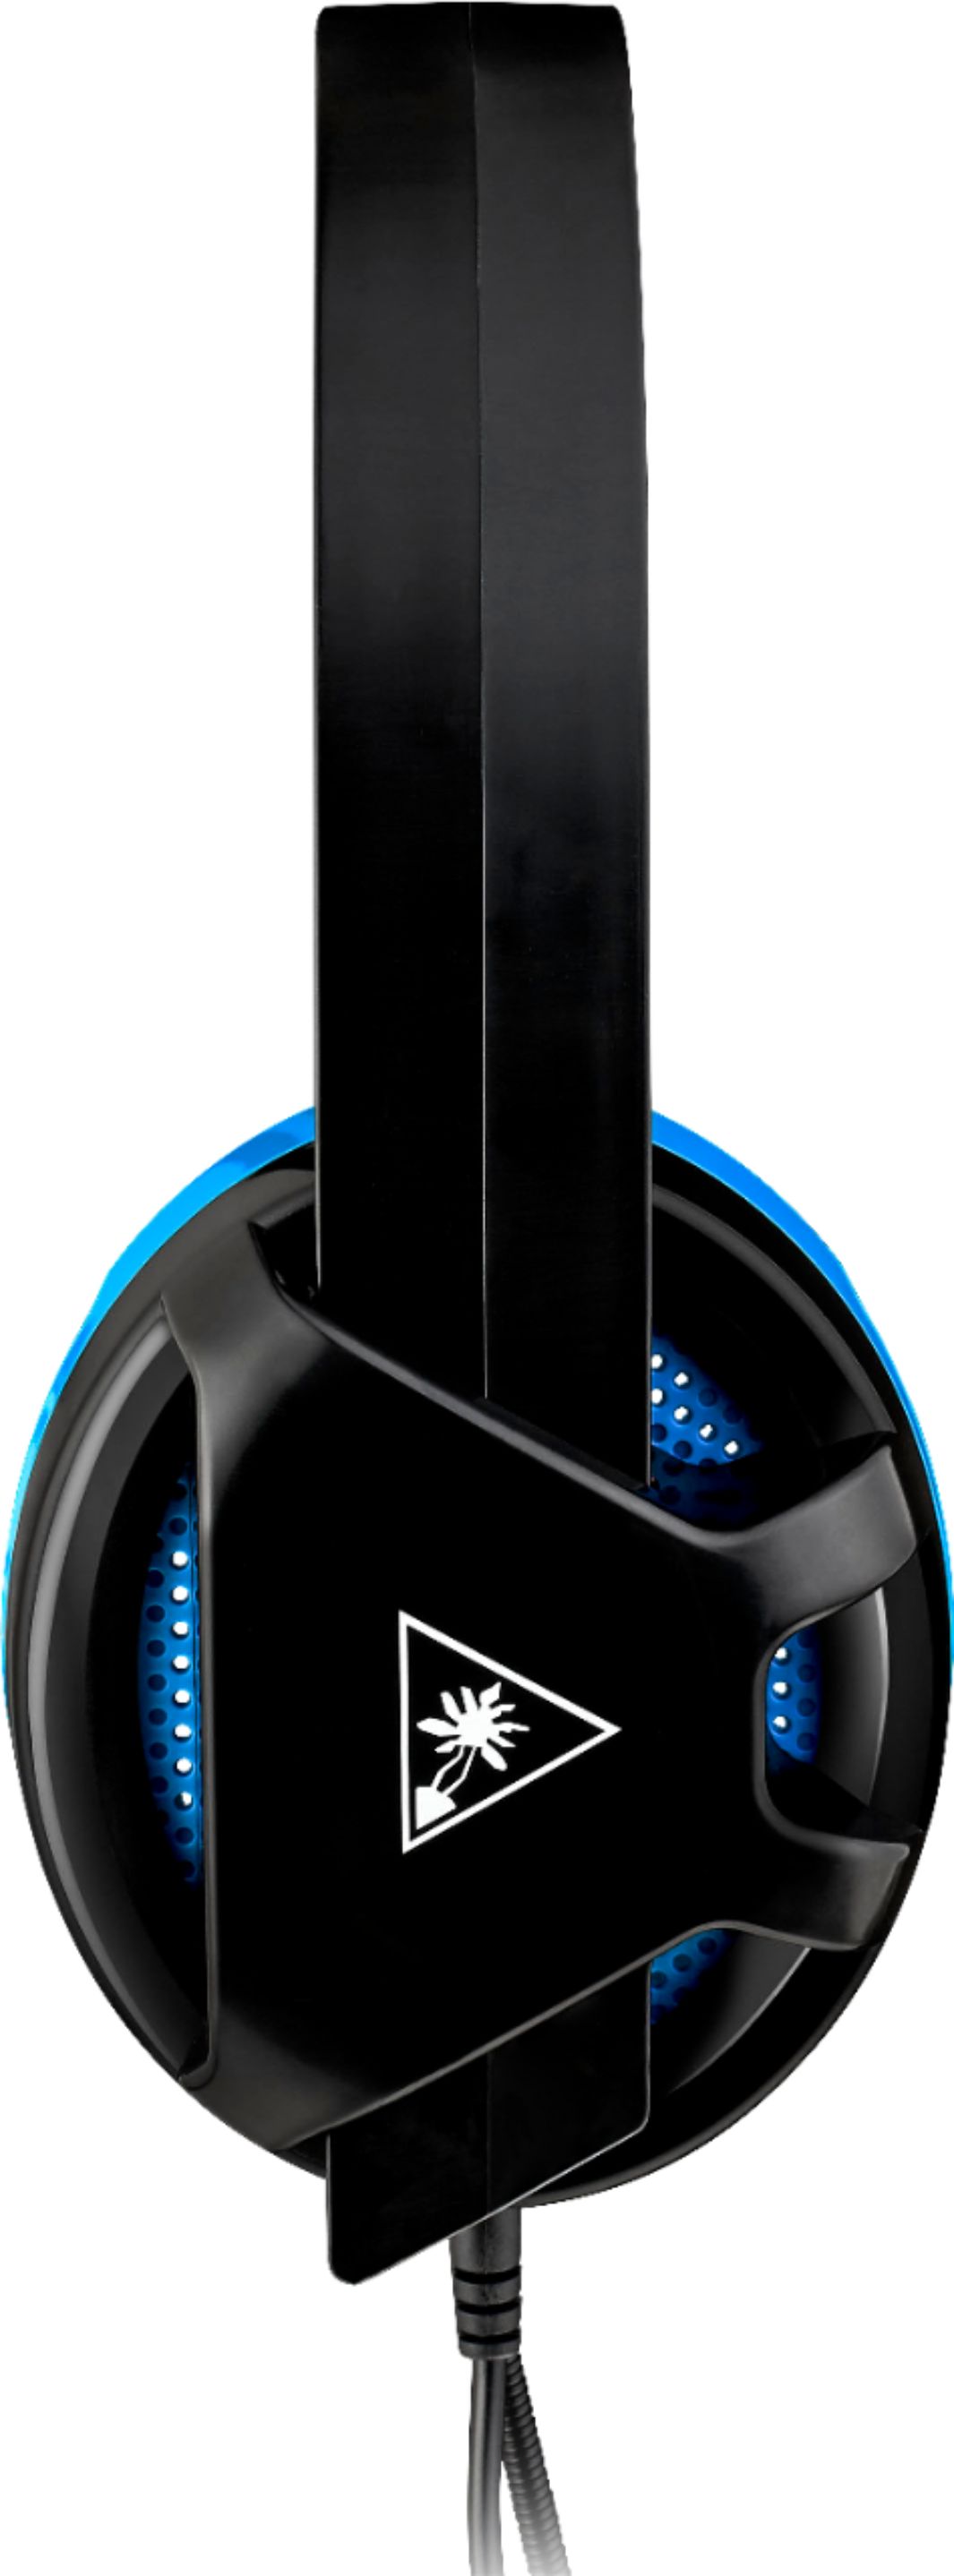 Best Buy: Headset Black/Blue TBS-3345-01 Recon PS4 PS5 for Chat Beach Turtle and